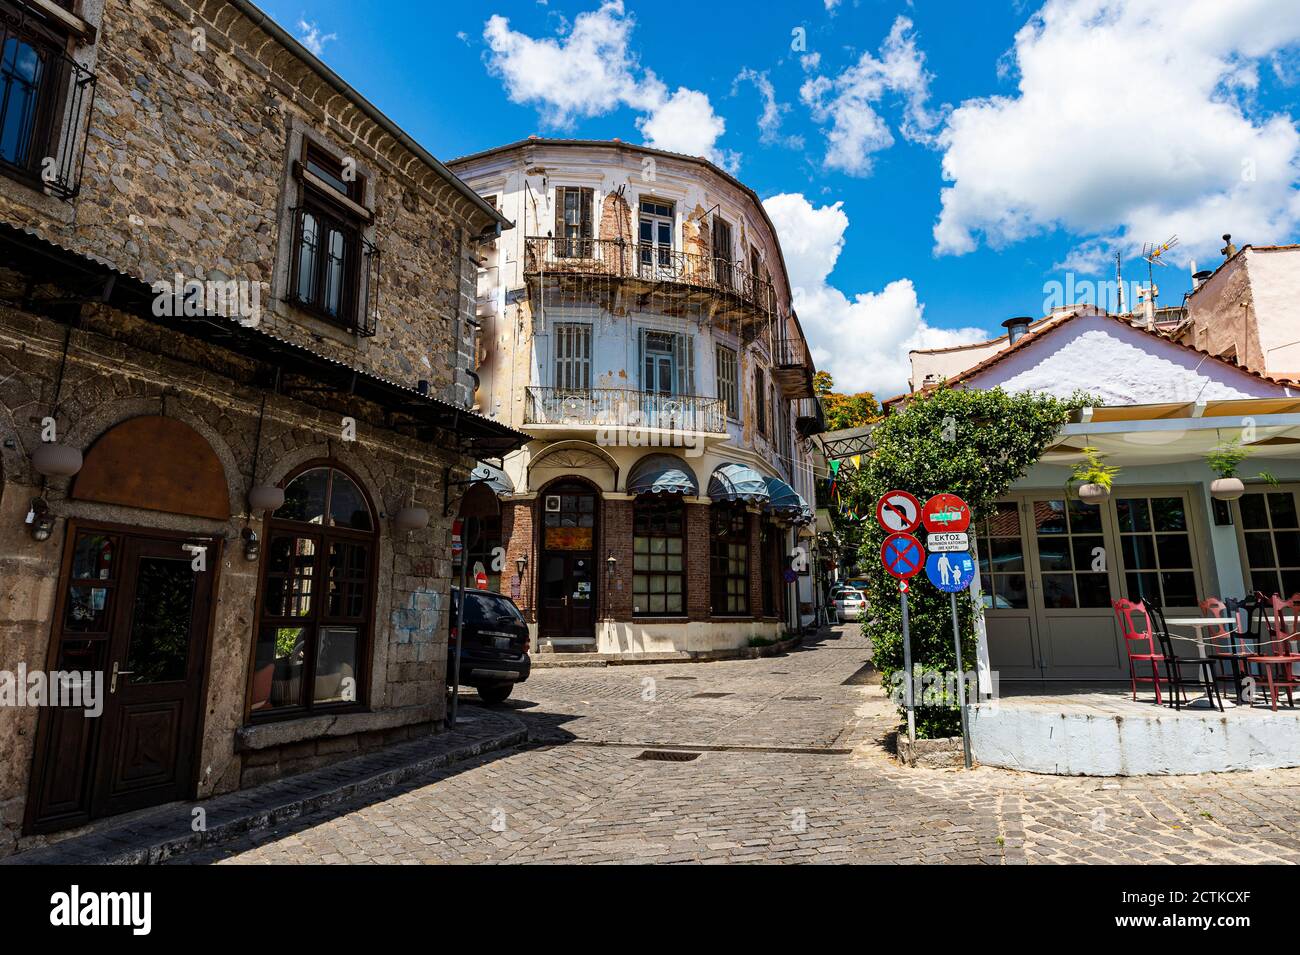 Greece, Eastern Macedonia and Thrace, Xanthi, Old Ottoman houses along empty cobblestone street Stock Photo